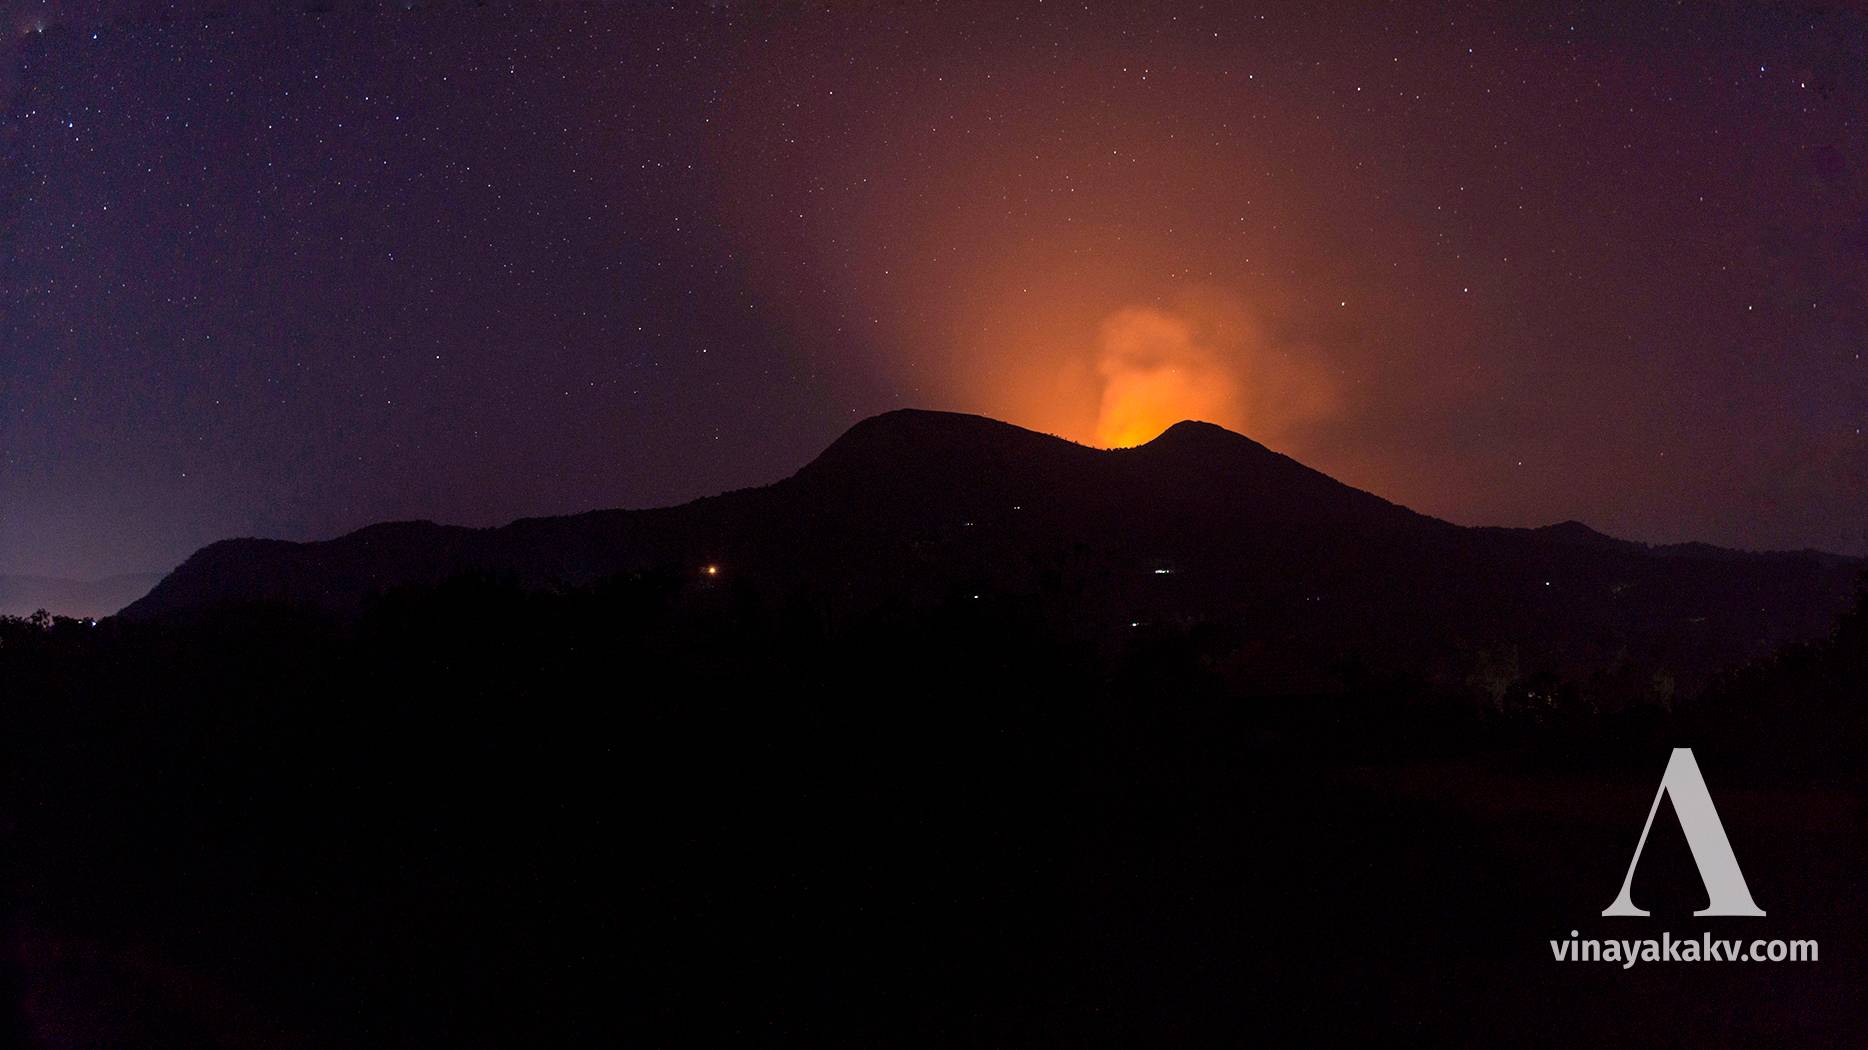 Grassland fire viewed from a distance at night